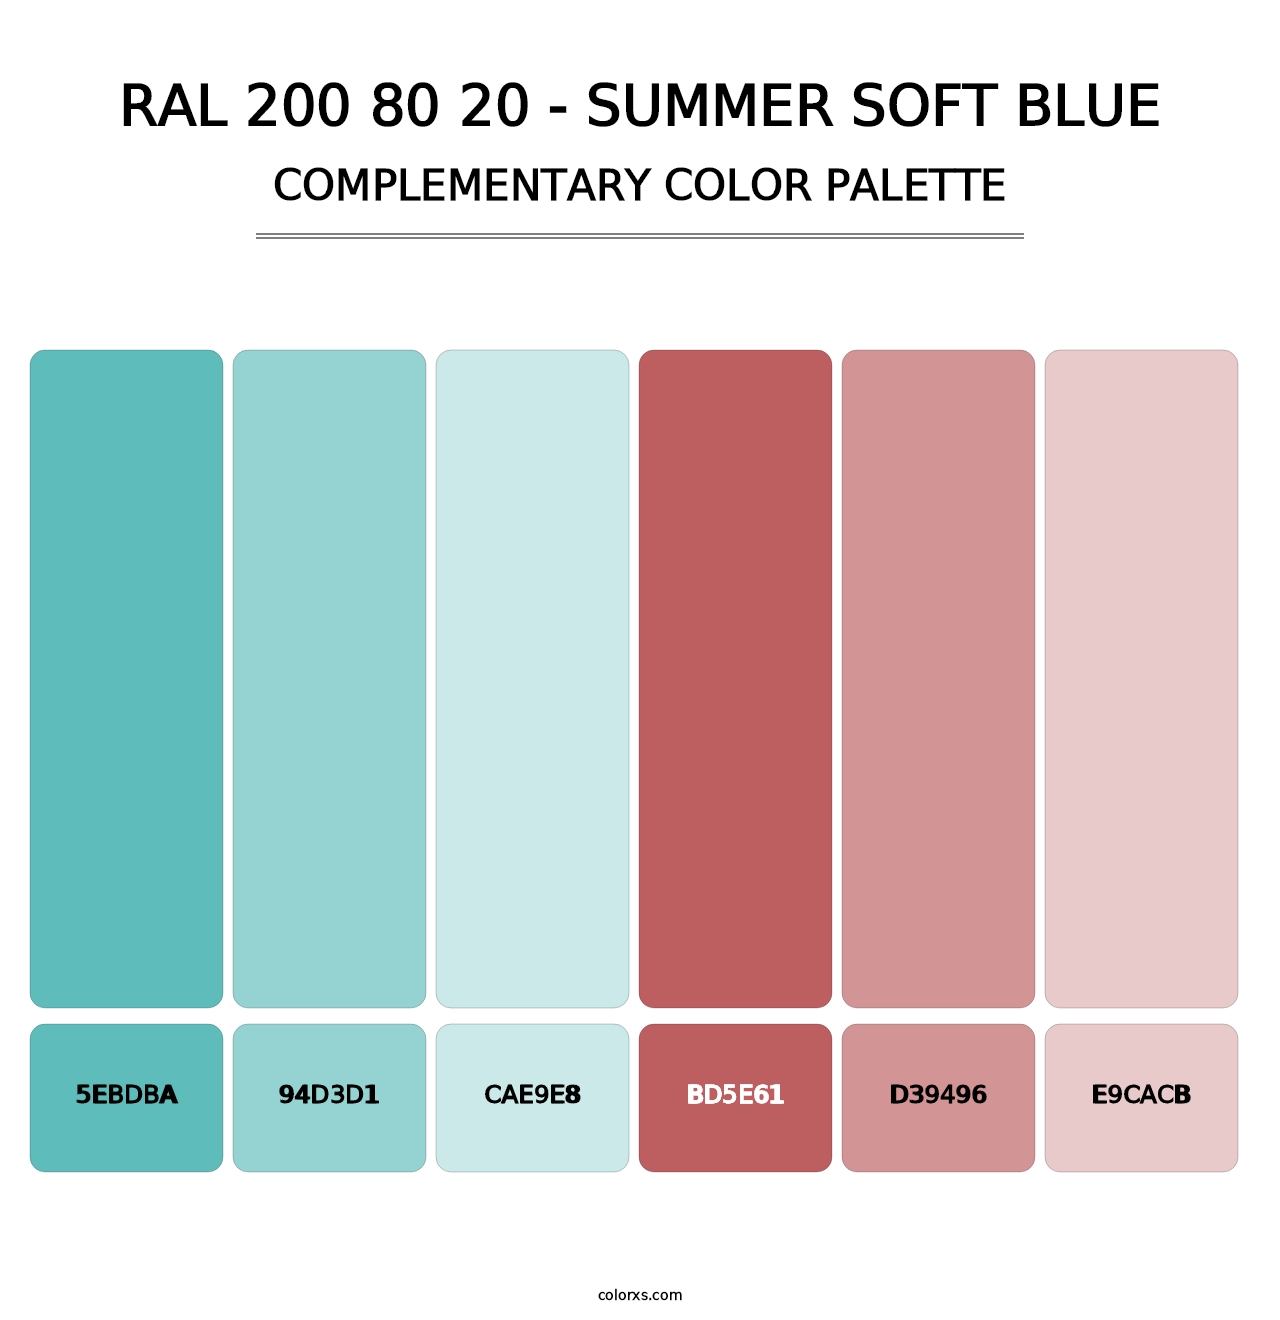 RAL 200 80 20 - Summer Soft Blue - Complementary Color Palette